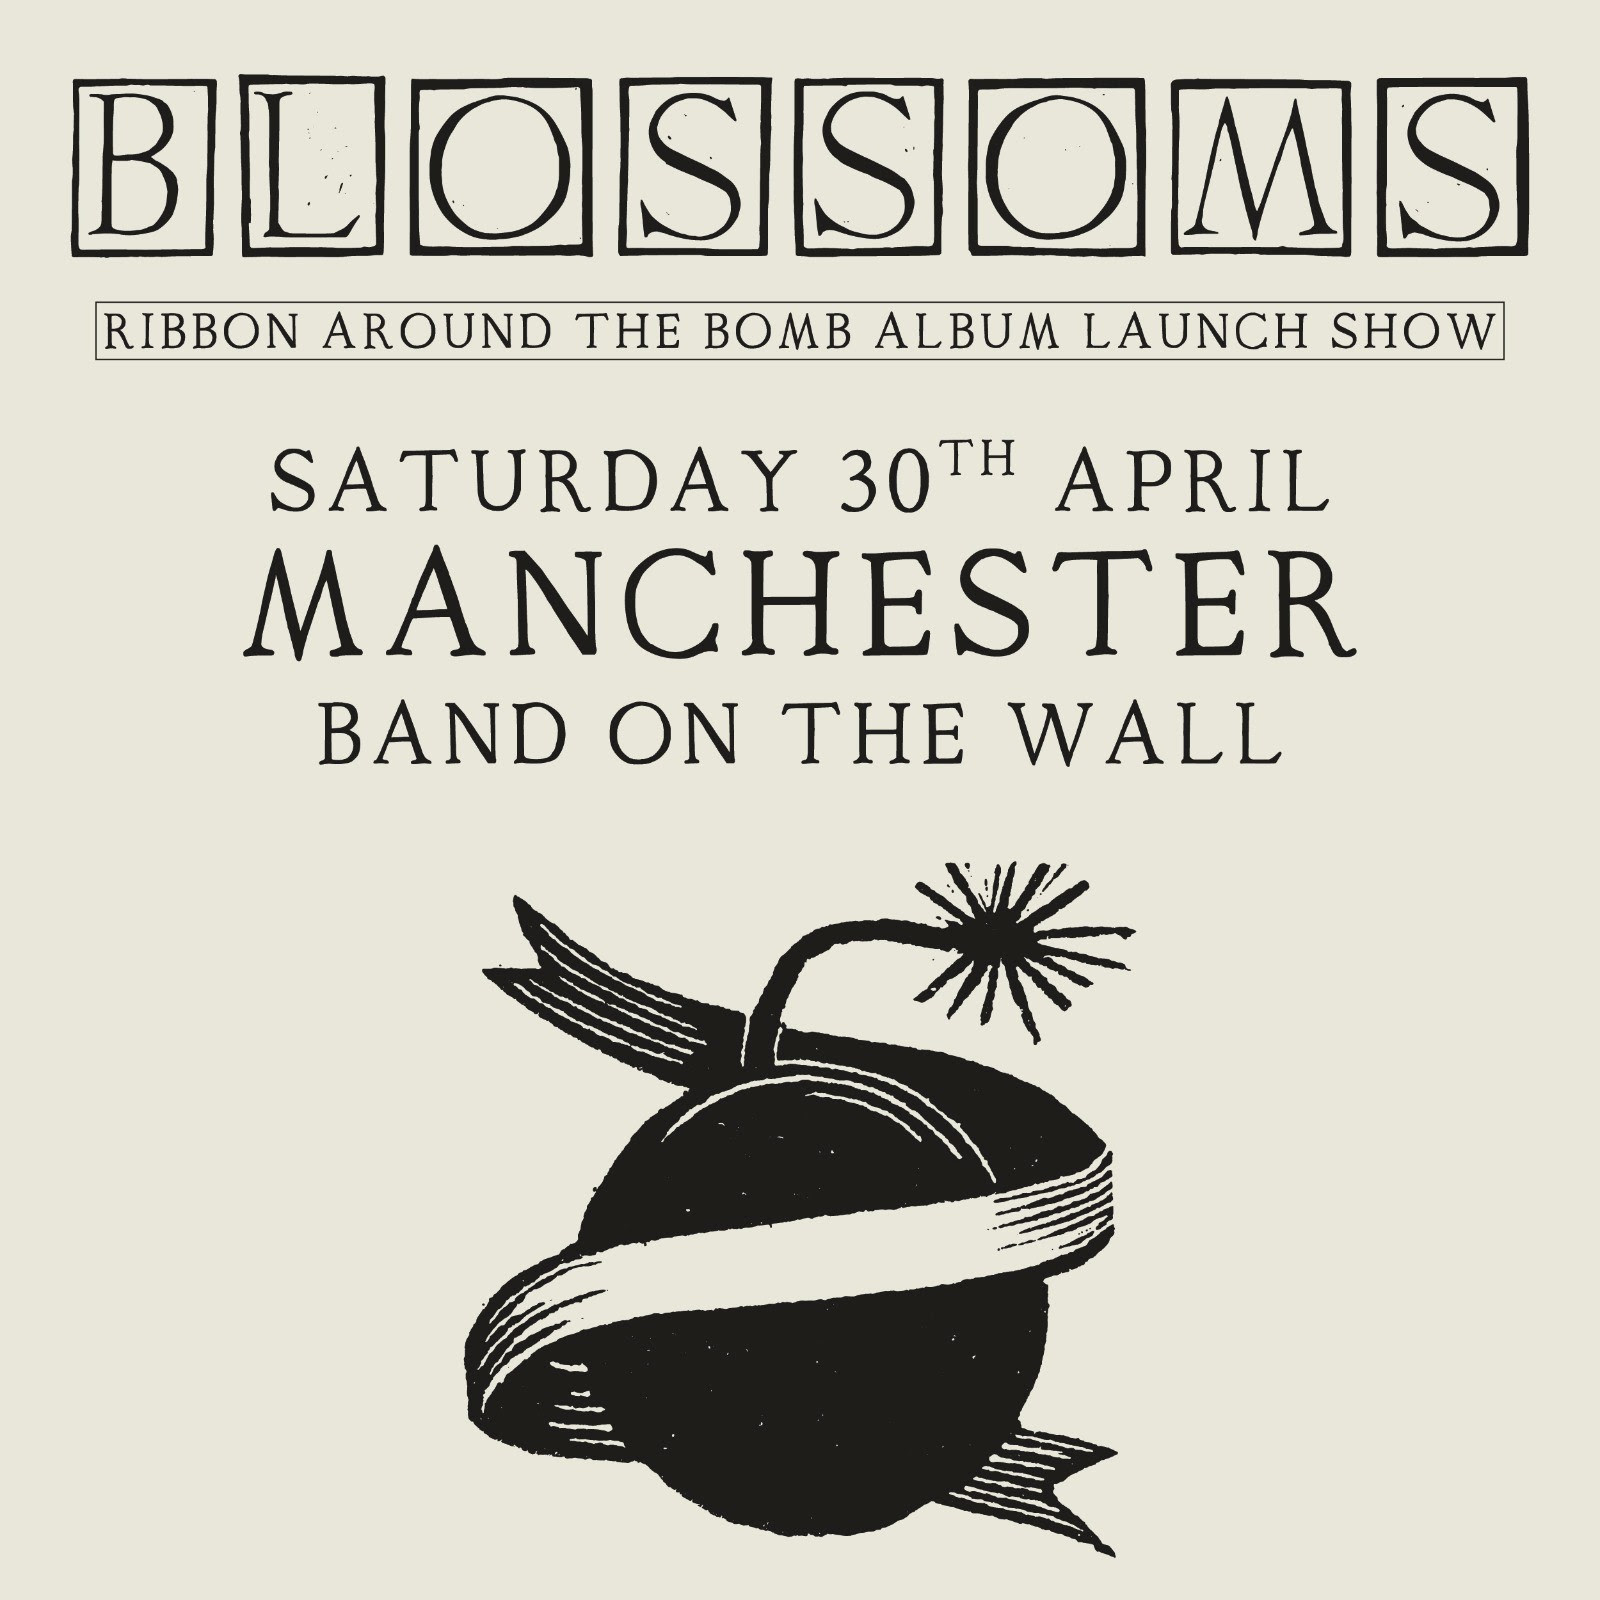 Local lads Blossoms to play intimate gig in Manchester next month, The Manc